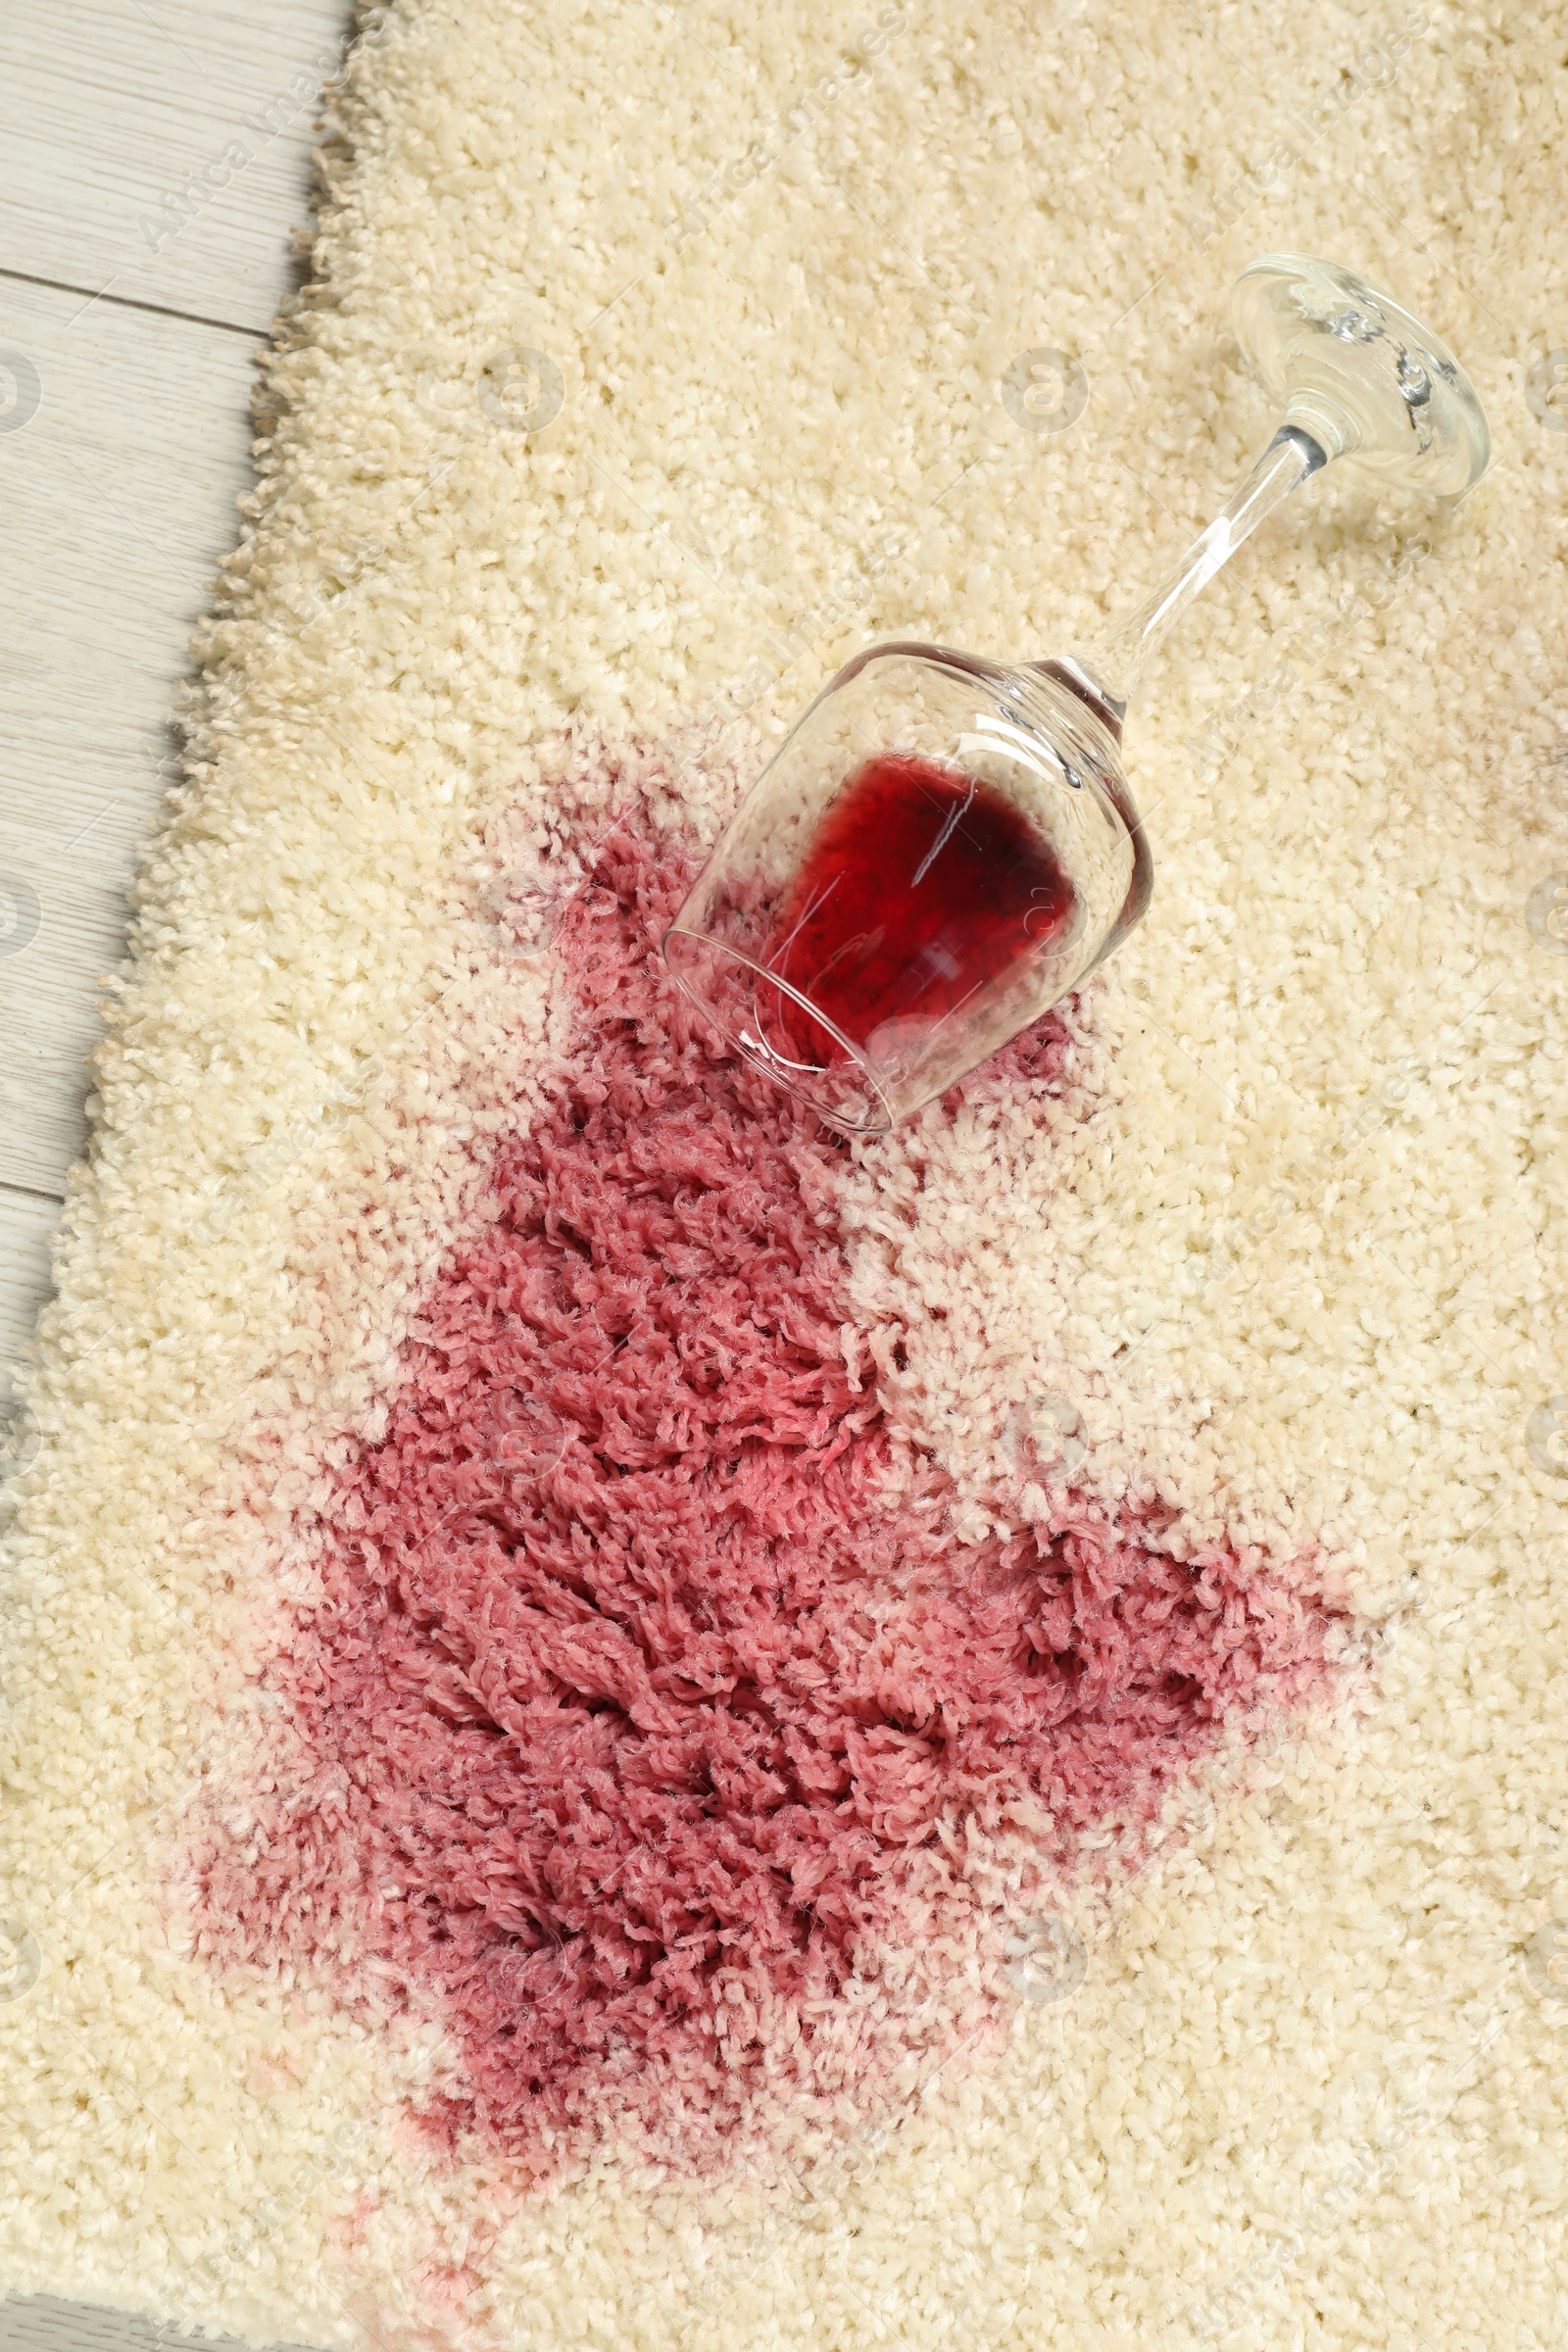 Photo of Overturned glass and spilled red wine on beige carpet, top view